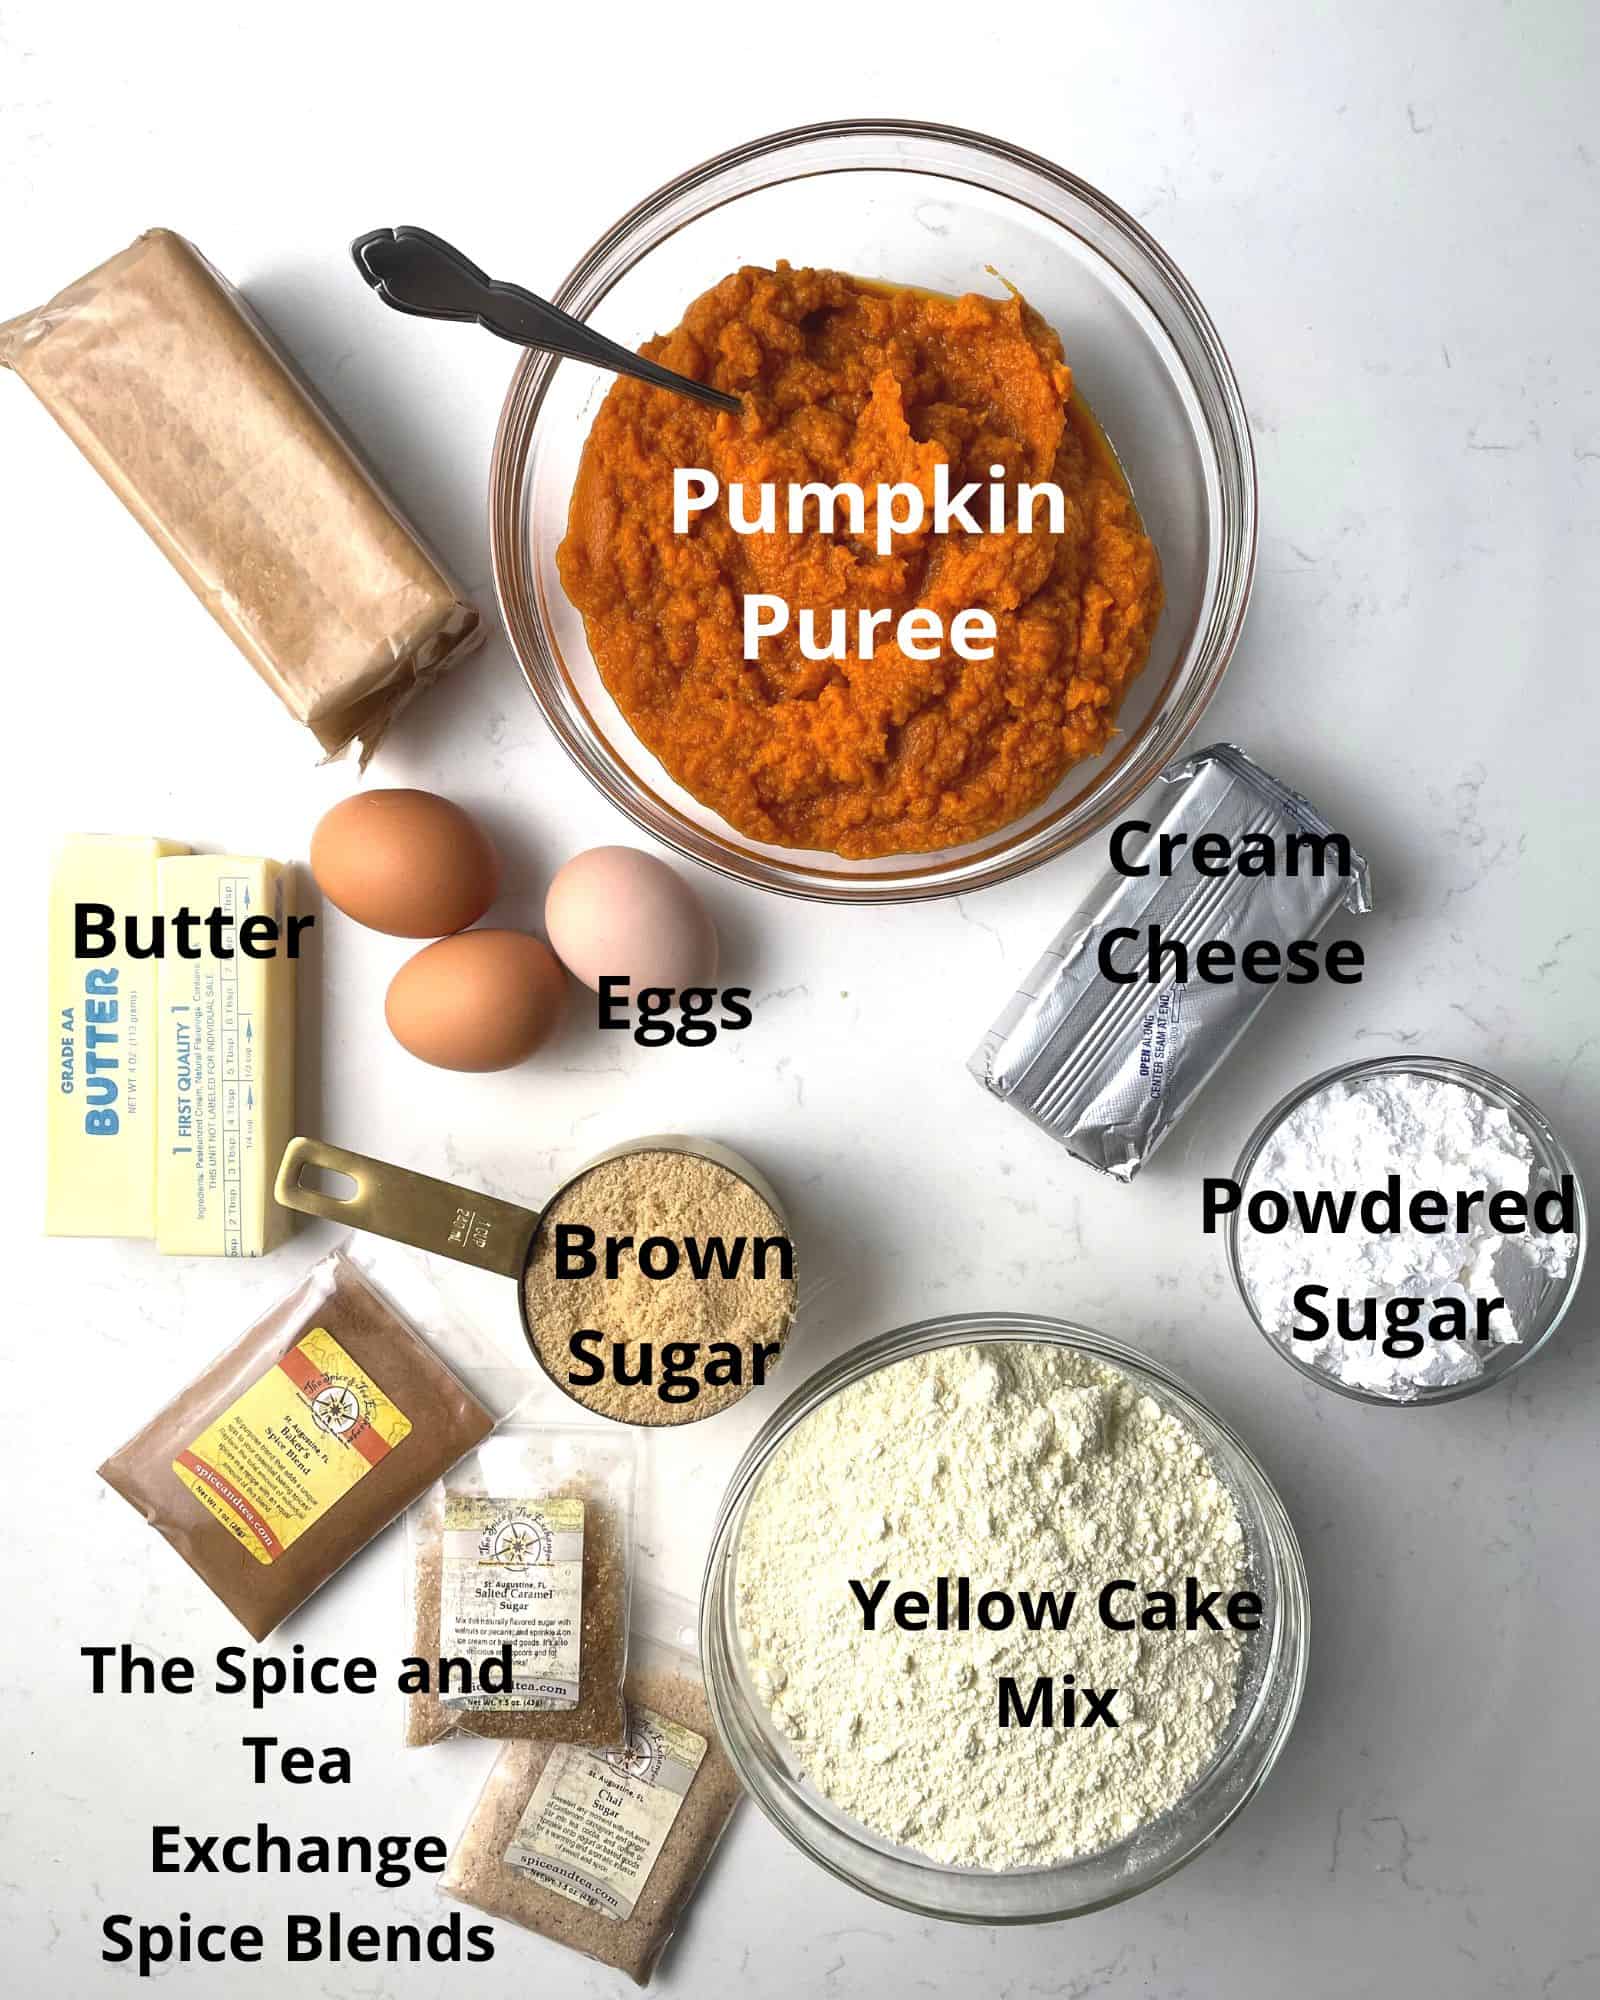 ingredients to make pumpkin cream cheese dump cake - pumpkin puree, cream cheese, powdered sugar, butter, brown sugar, eggs, yellow cake mix, and spices.